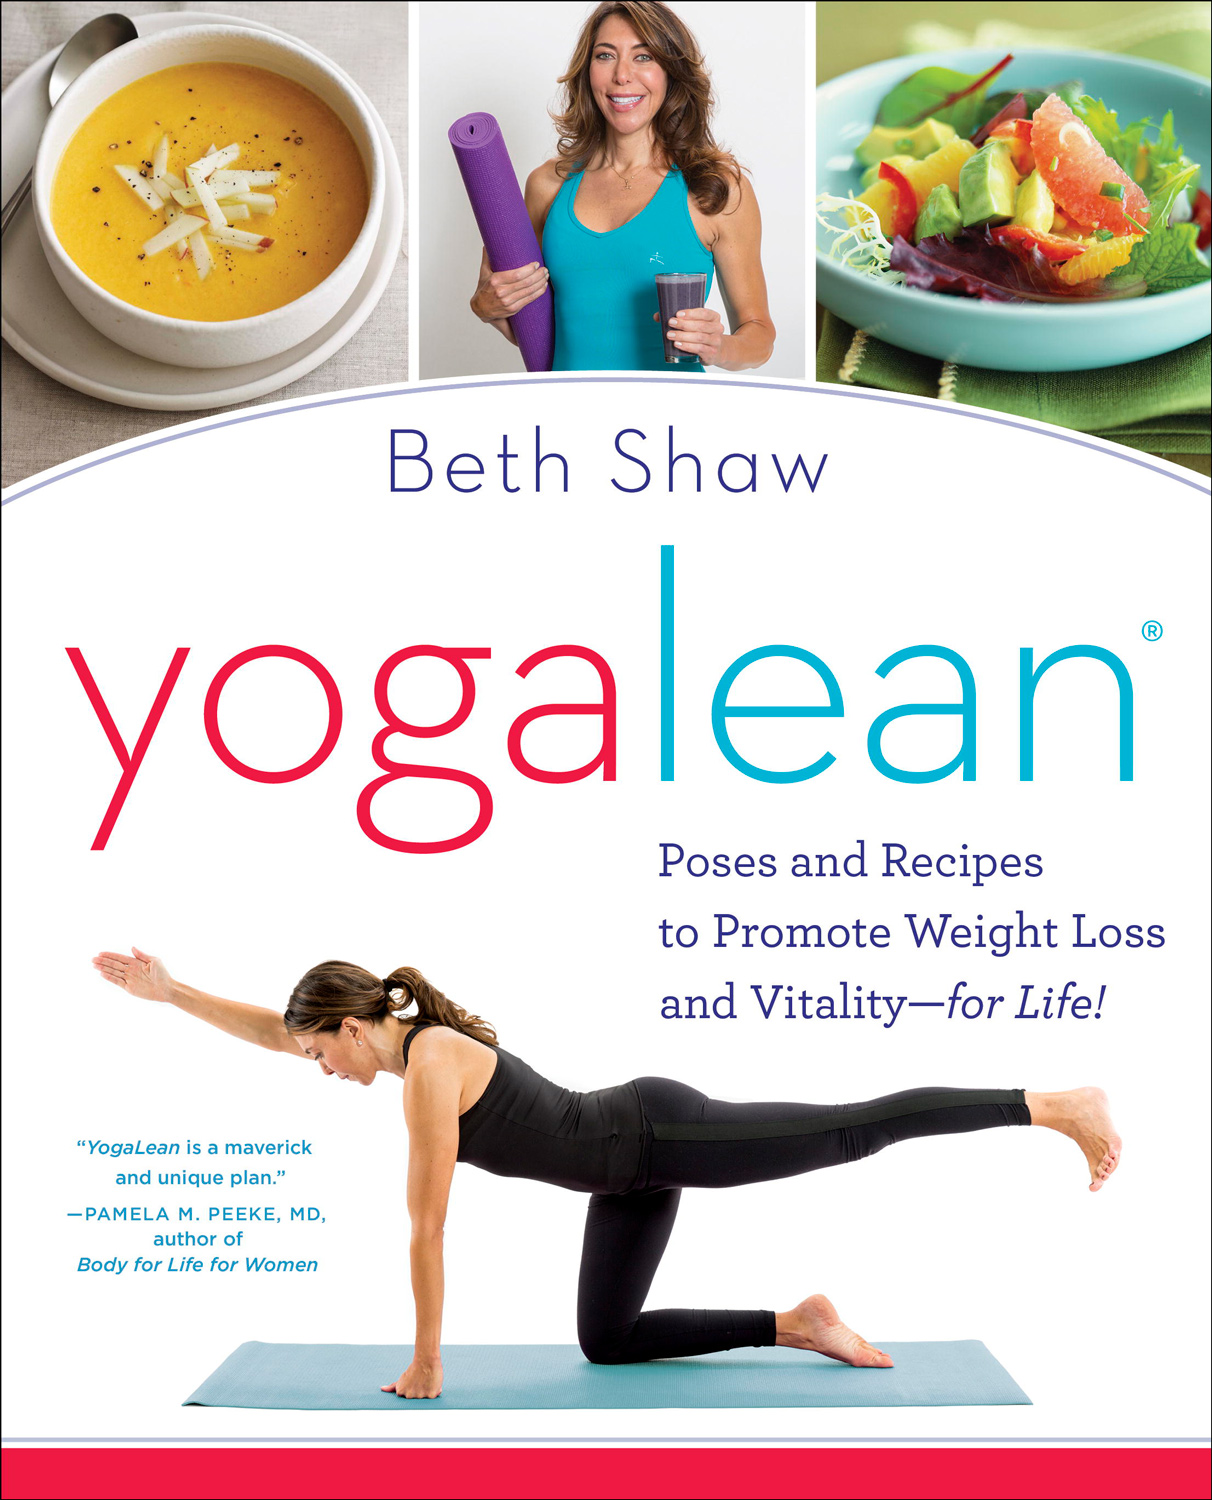 YogaLean Poses and Recipes to Promote Weight Loss and Vitality-for Life - image 1